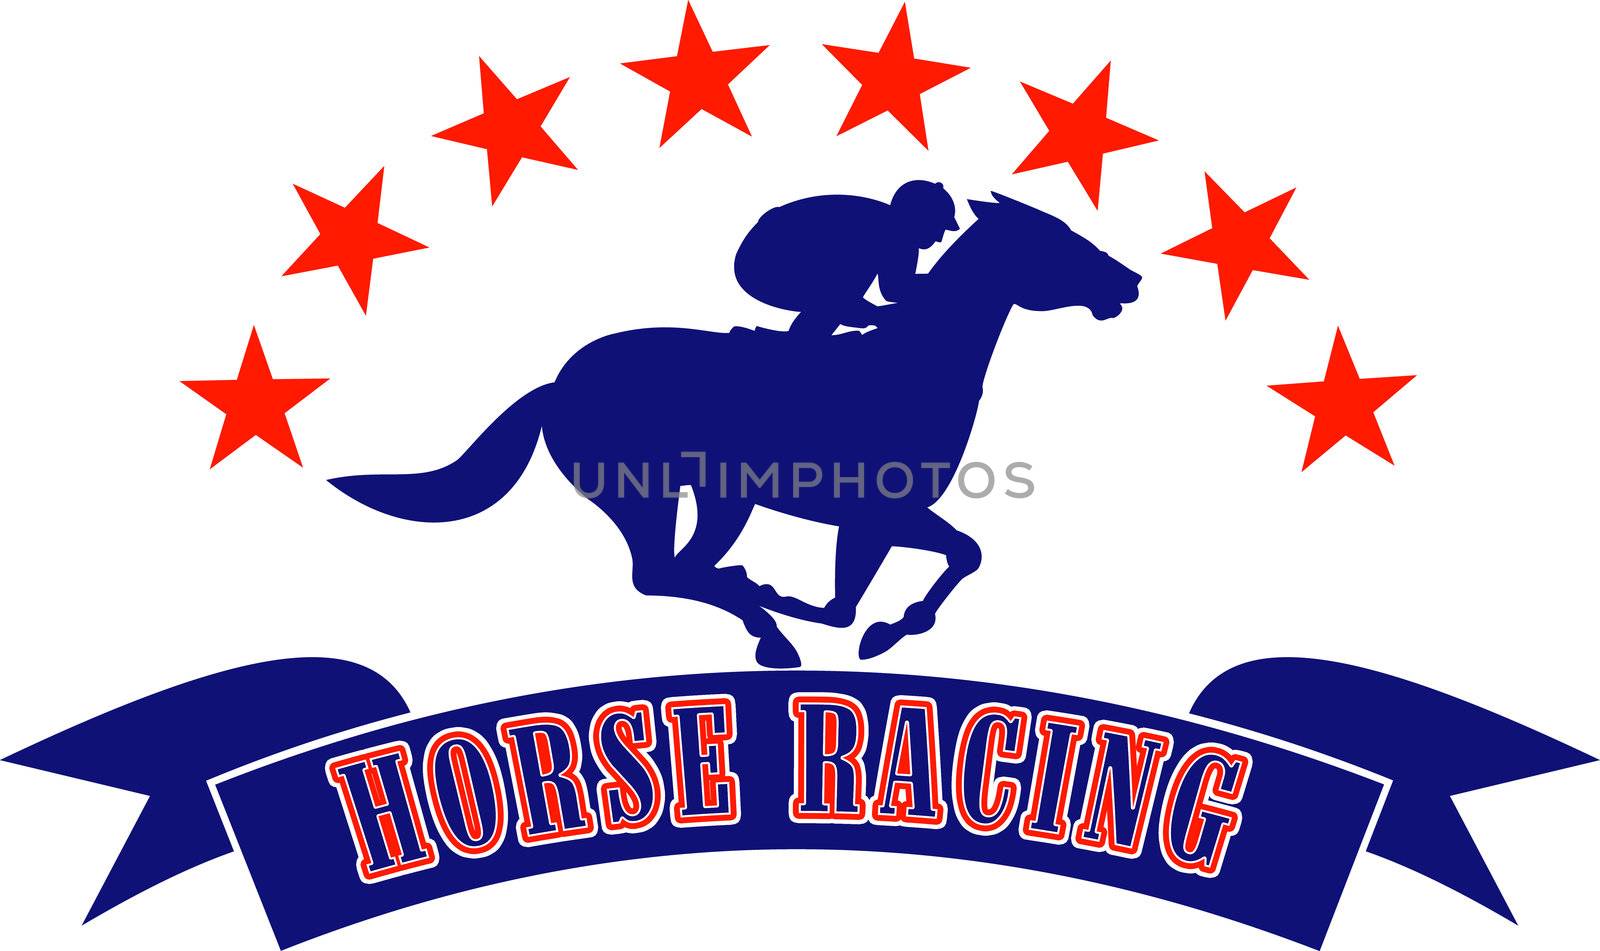 illustration of a horse and jockey racing silhouette with scroll in front and stars in background isolated on white 